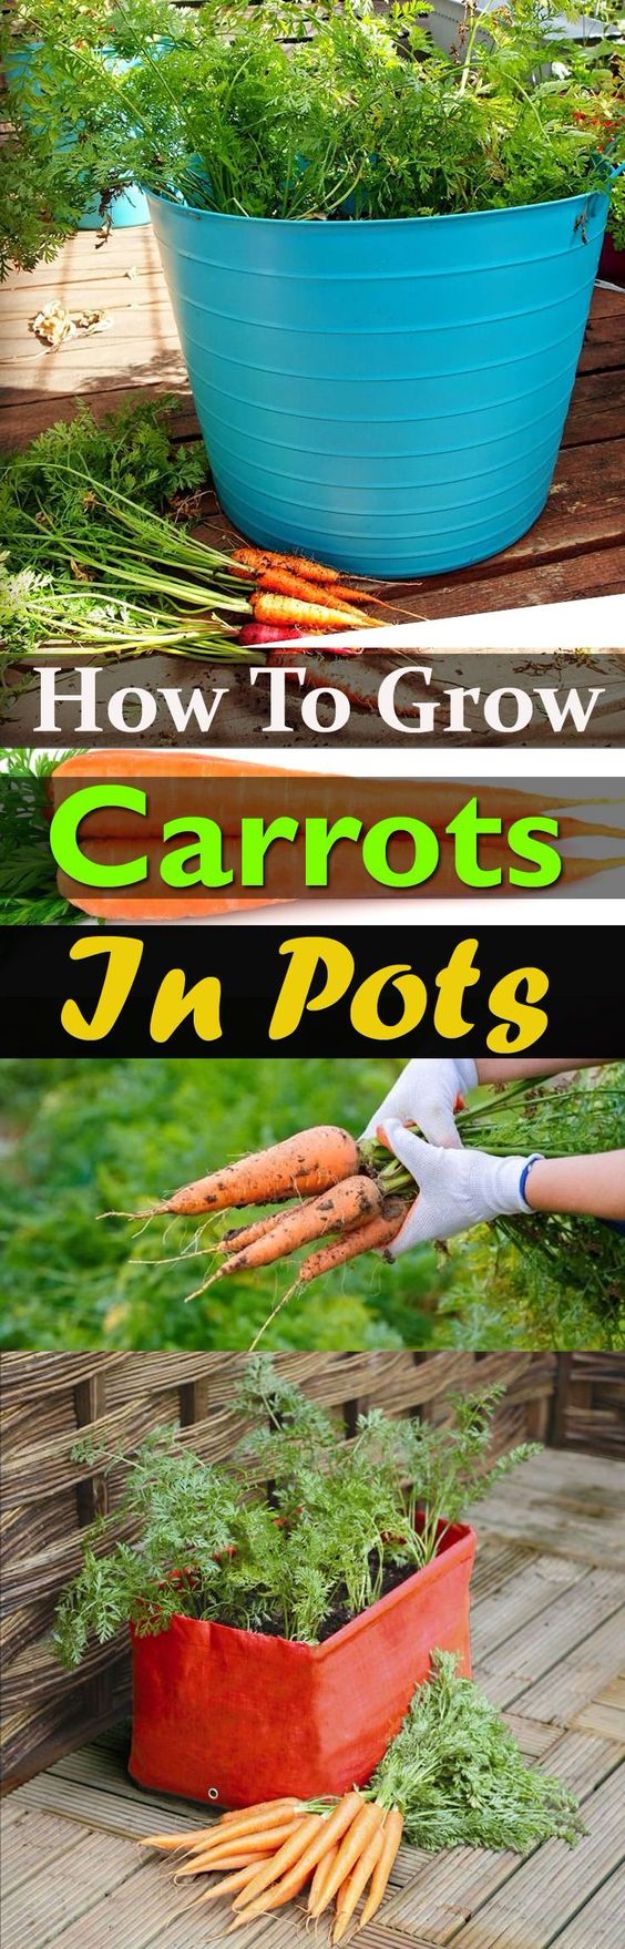 Container Gardening Ideas - Grow Carrots In Pots - Easy Garden Projects for Containers and Growing Plants in Small Spaces - DIY Potting Tips and Planter Boxes for Vegetables, Herbs and Flowers - Simple Ideas for Beginners -Shade, Full Sun, Pation and Yard Landscape Idea tutorials 